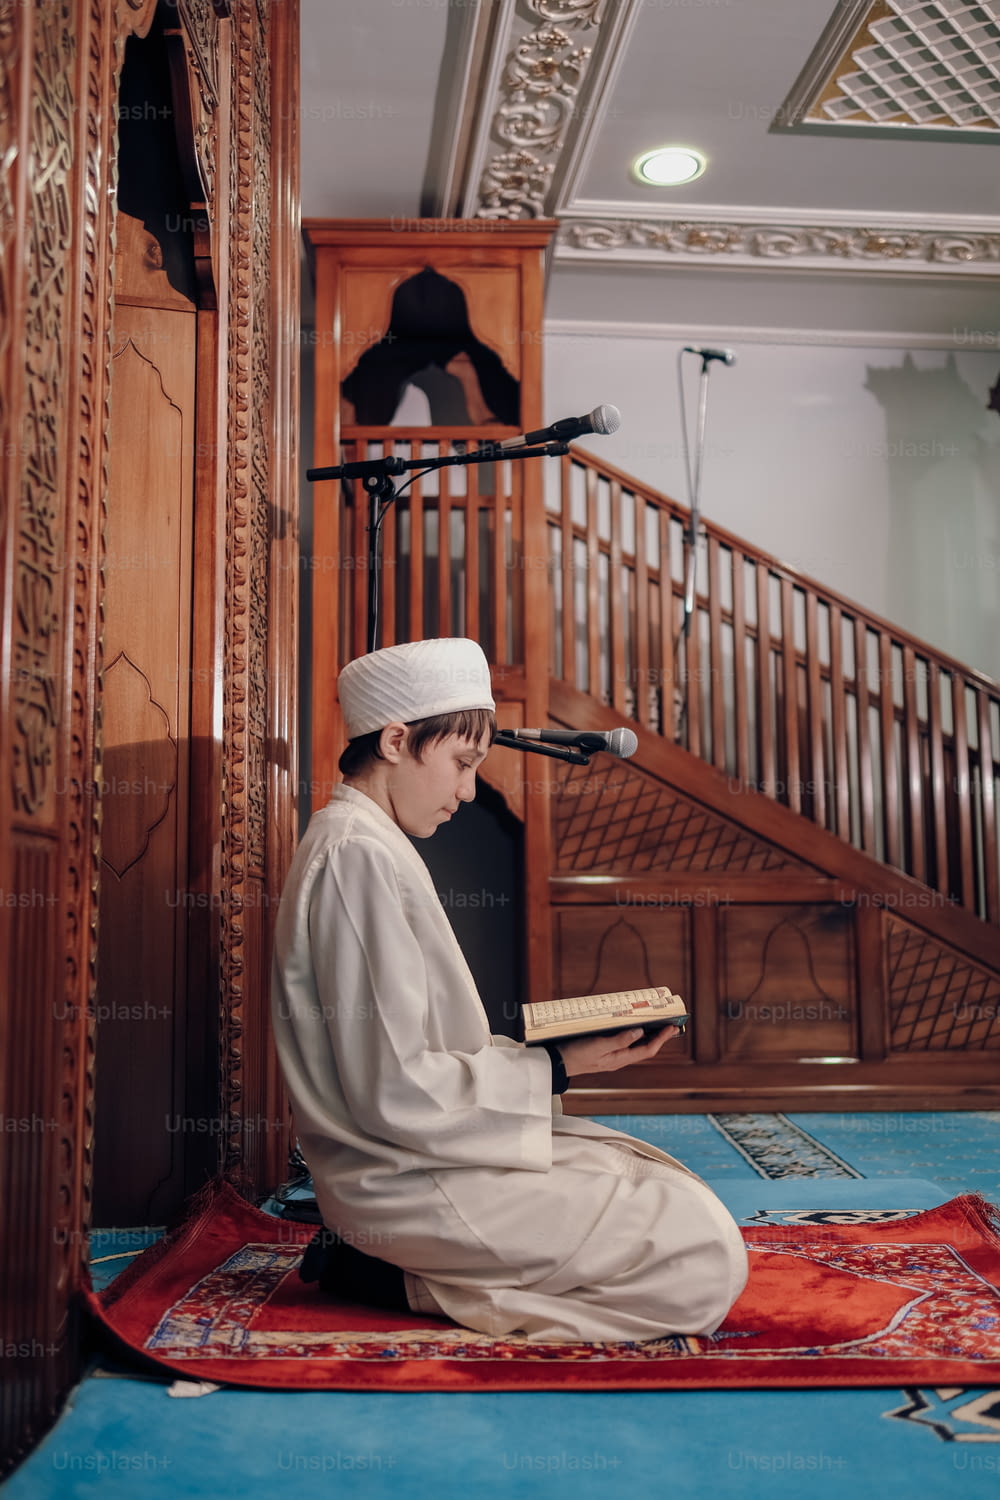 a person sitting on a rug reading a book